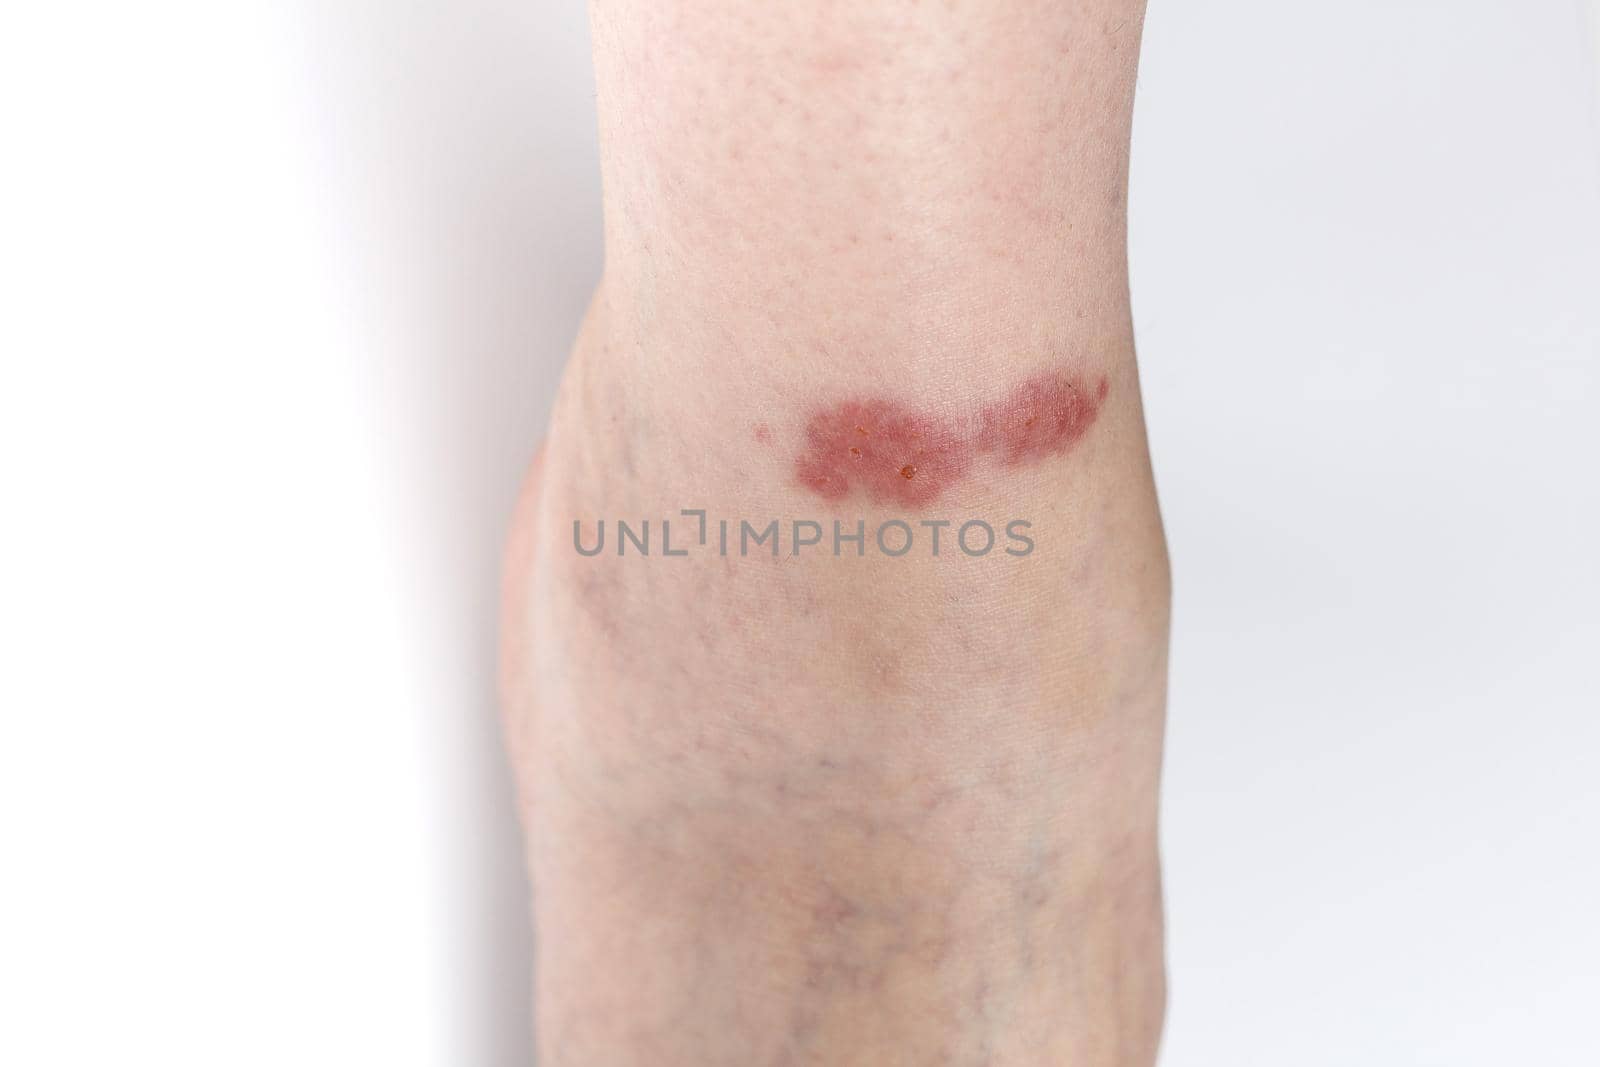 Redness on the skin of the leg from an insect bite. Copy space by lara29